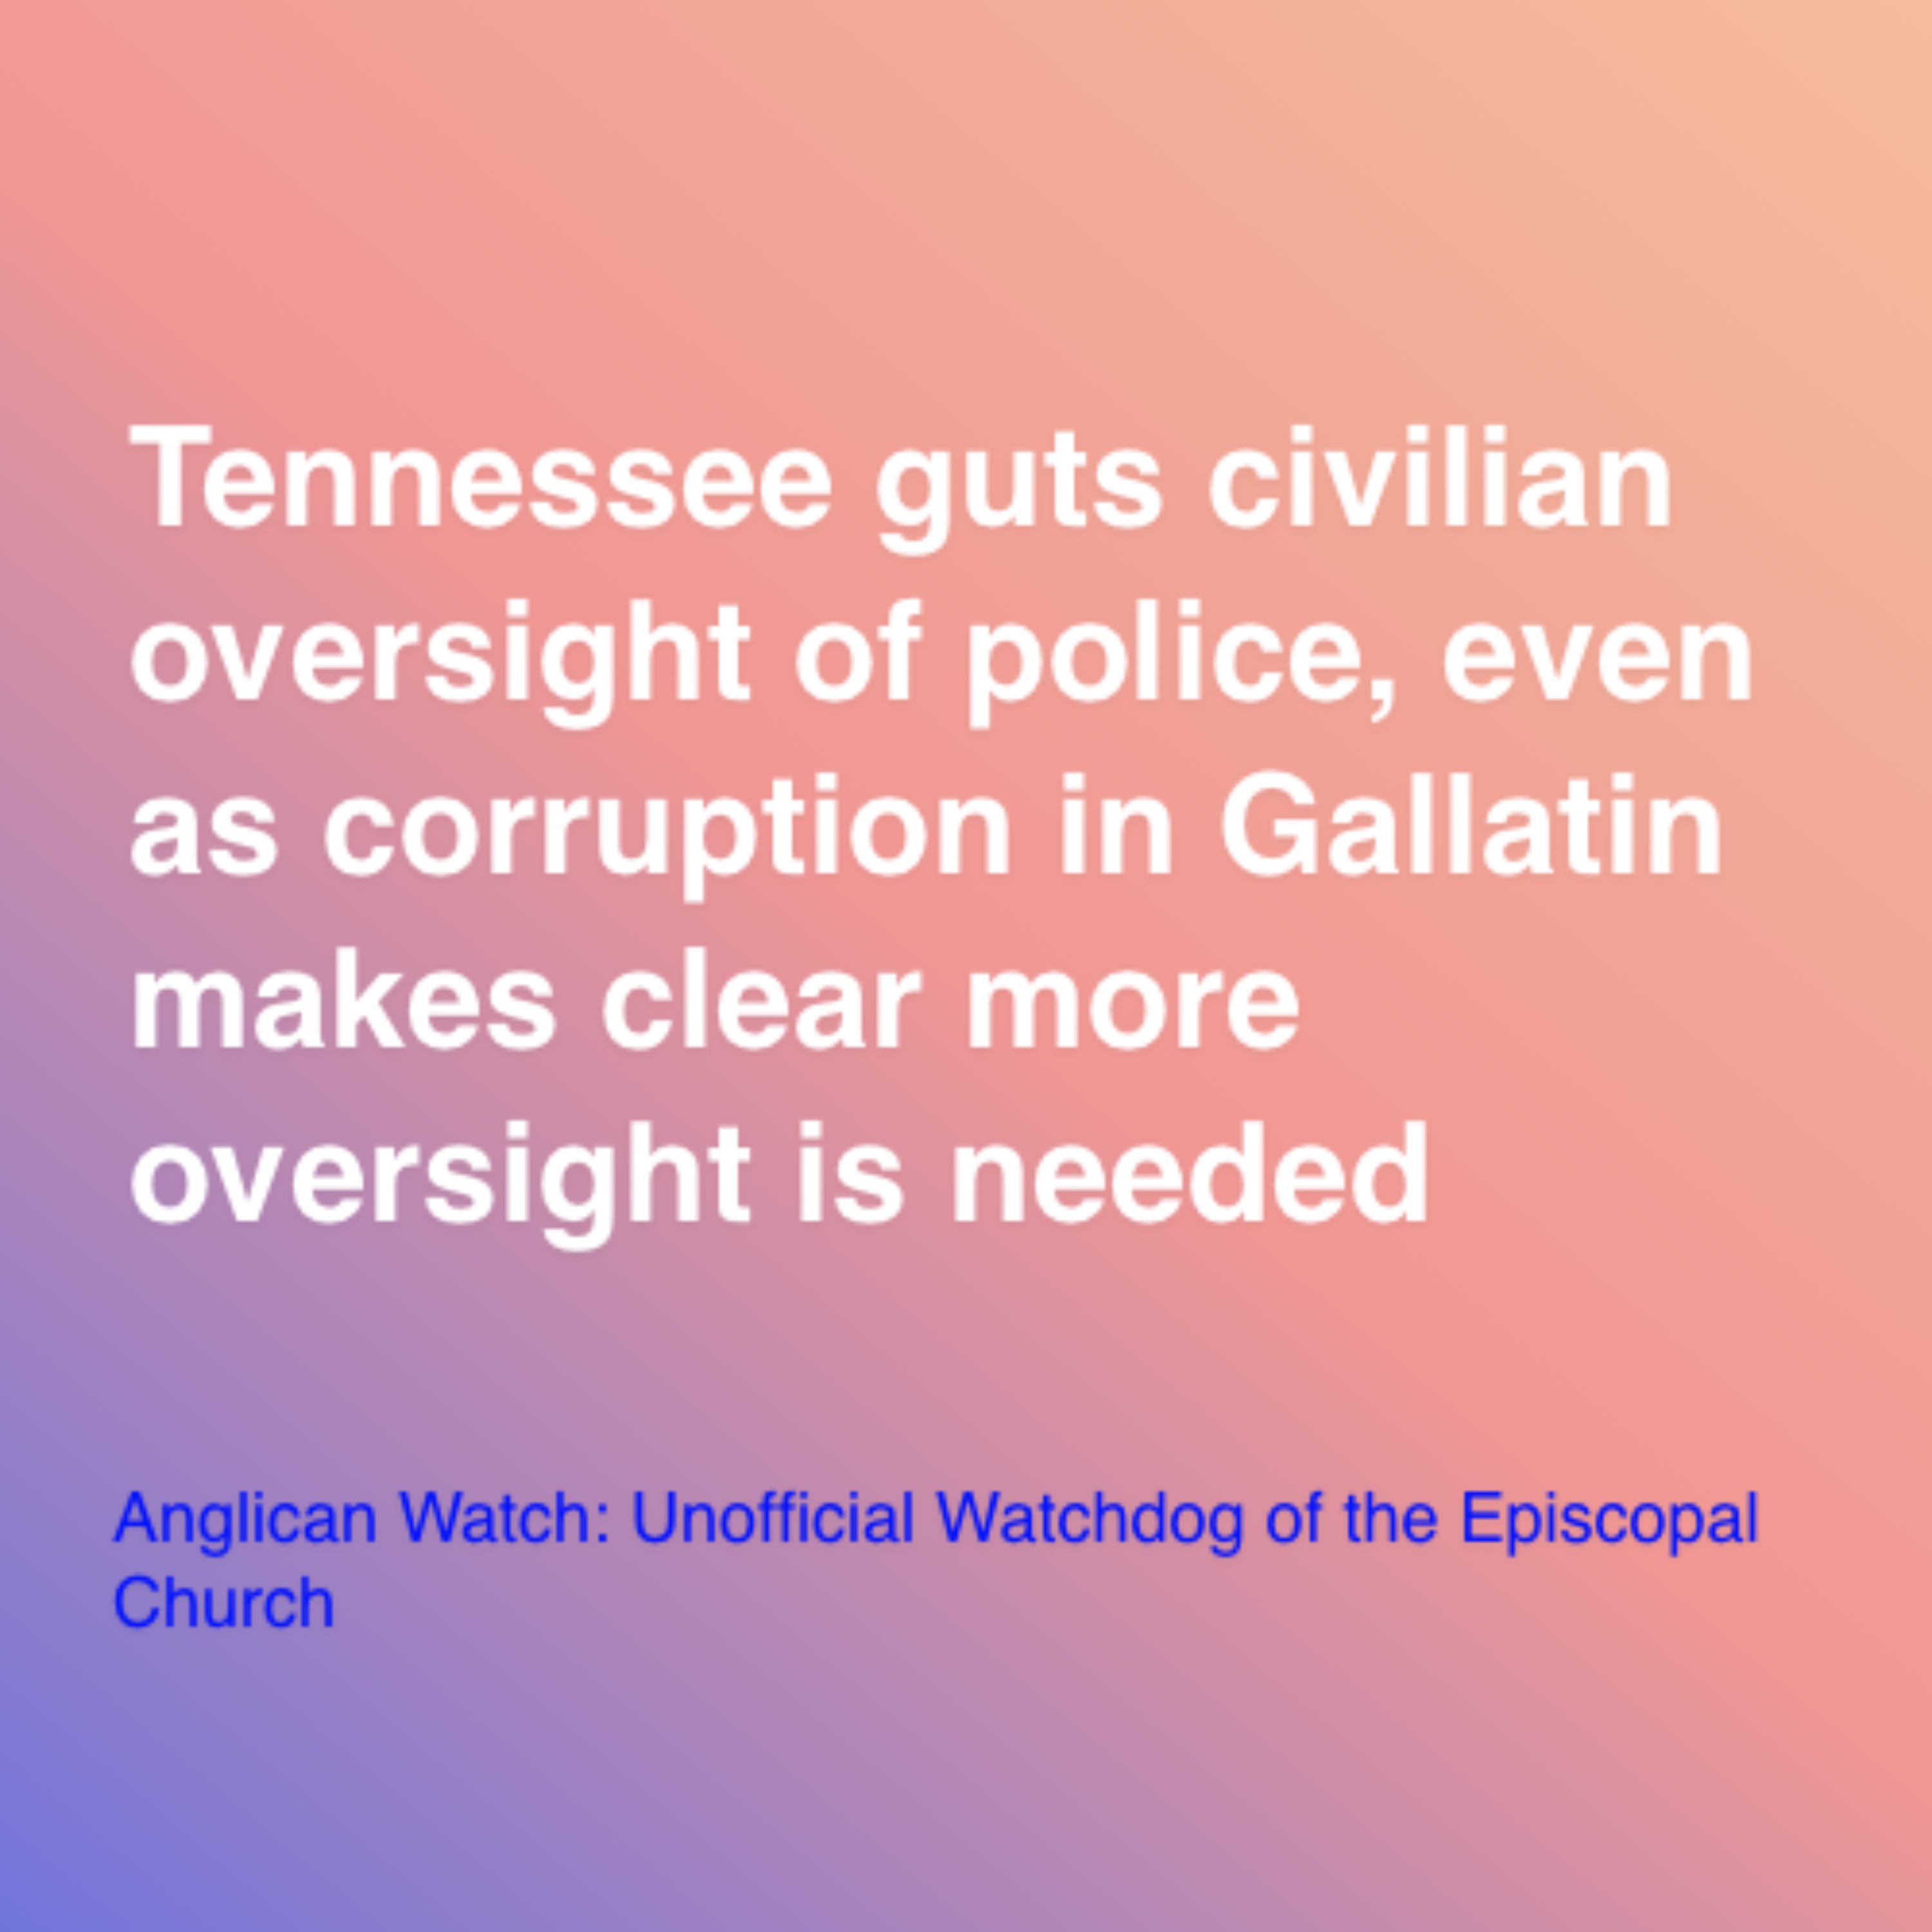 Tennessee guts civilian oversight of police, even as corruption in Gallatin makes clear more oversight is needed